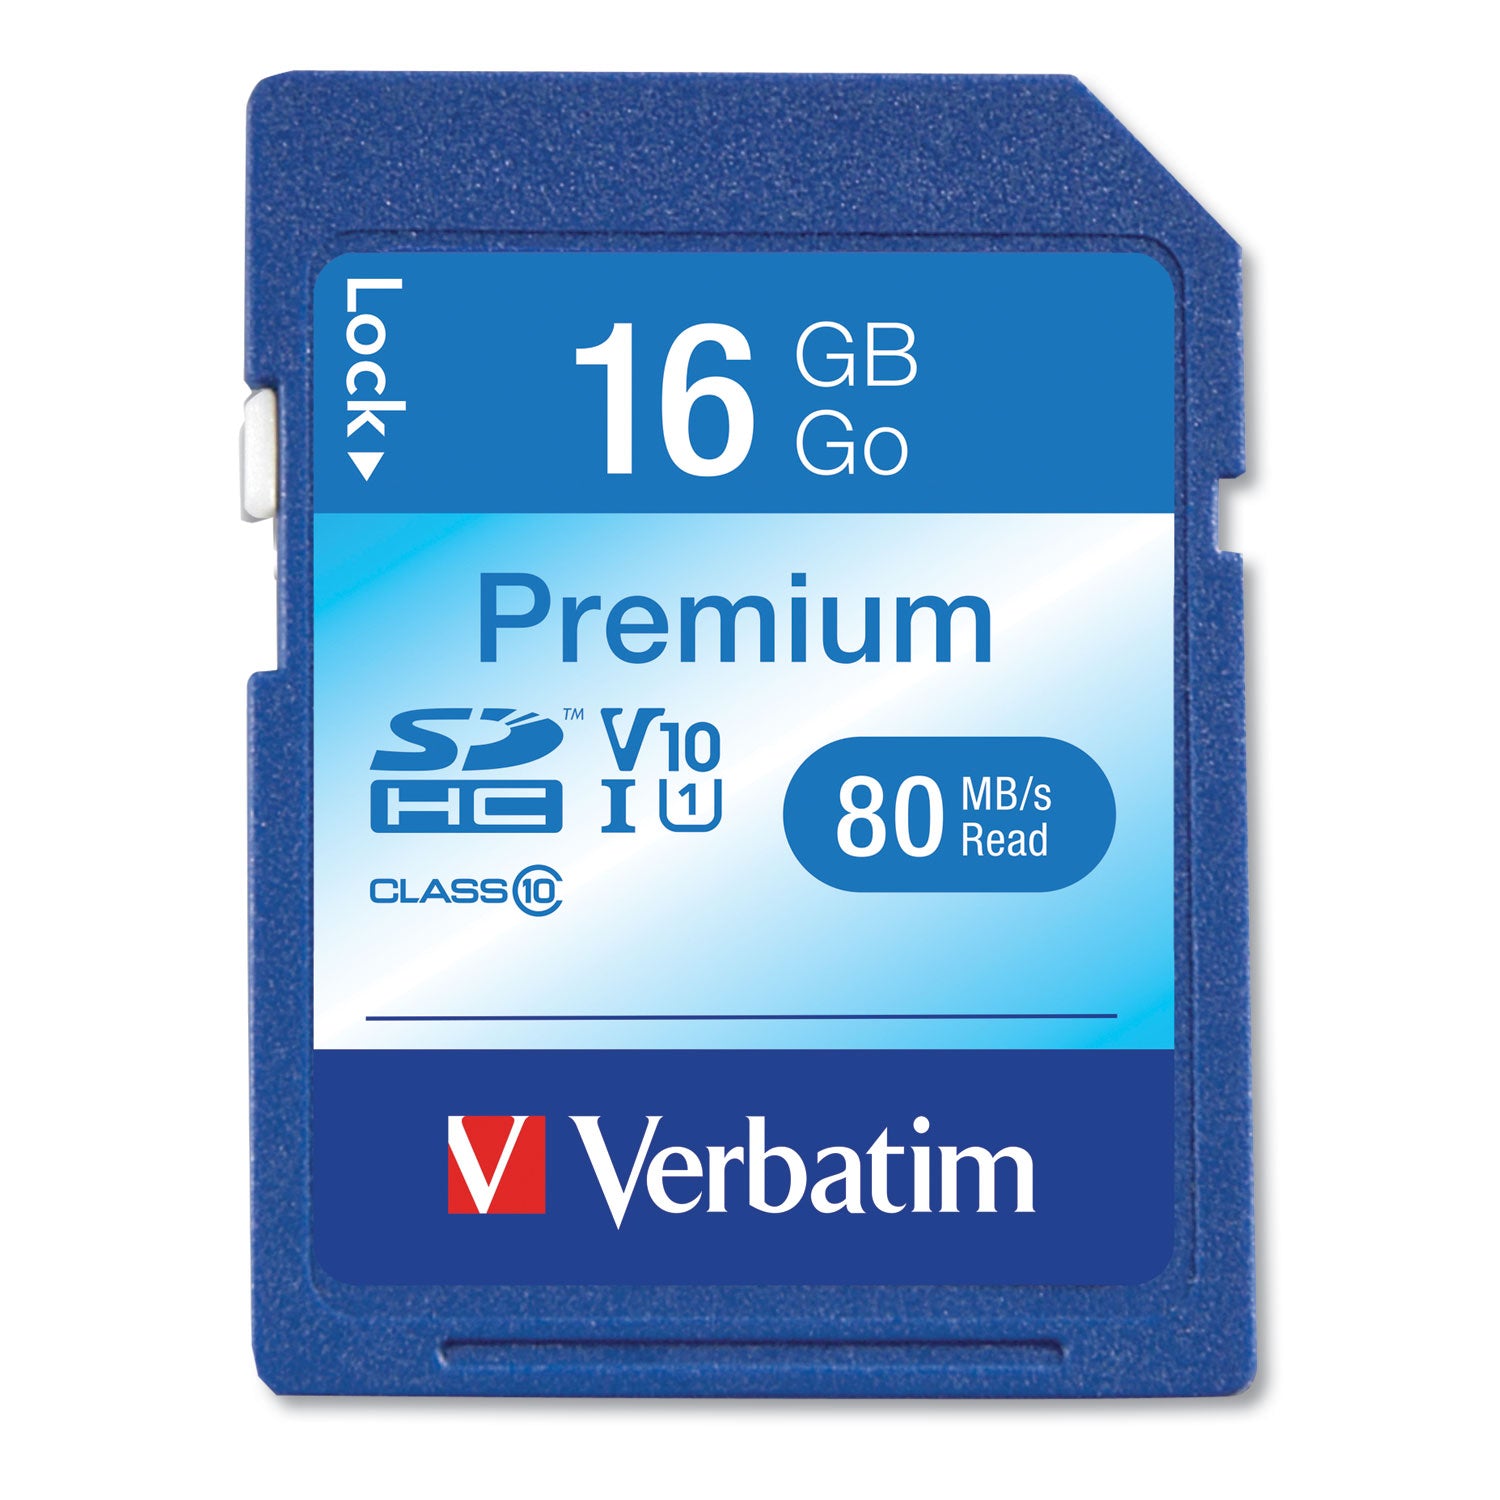 16GB Premium SDHC Memory Card, UHS-I V10 U1 Class 10, Up to 80MB/s Read Speed - 